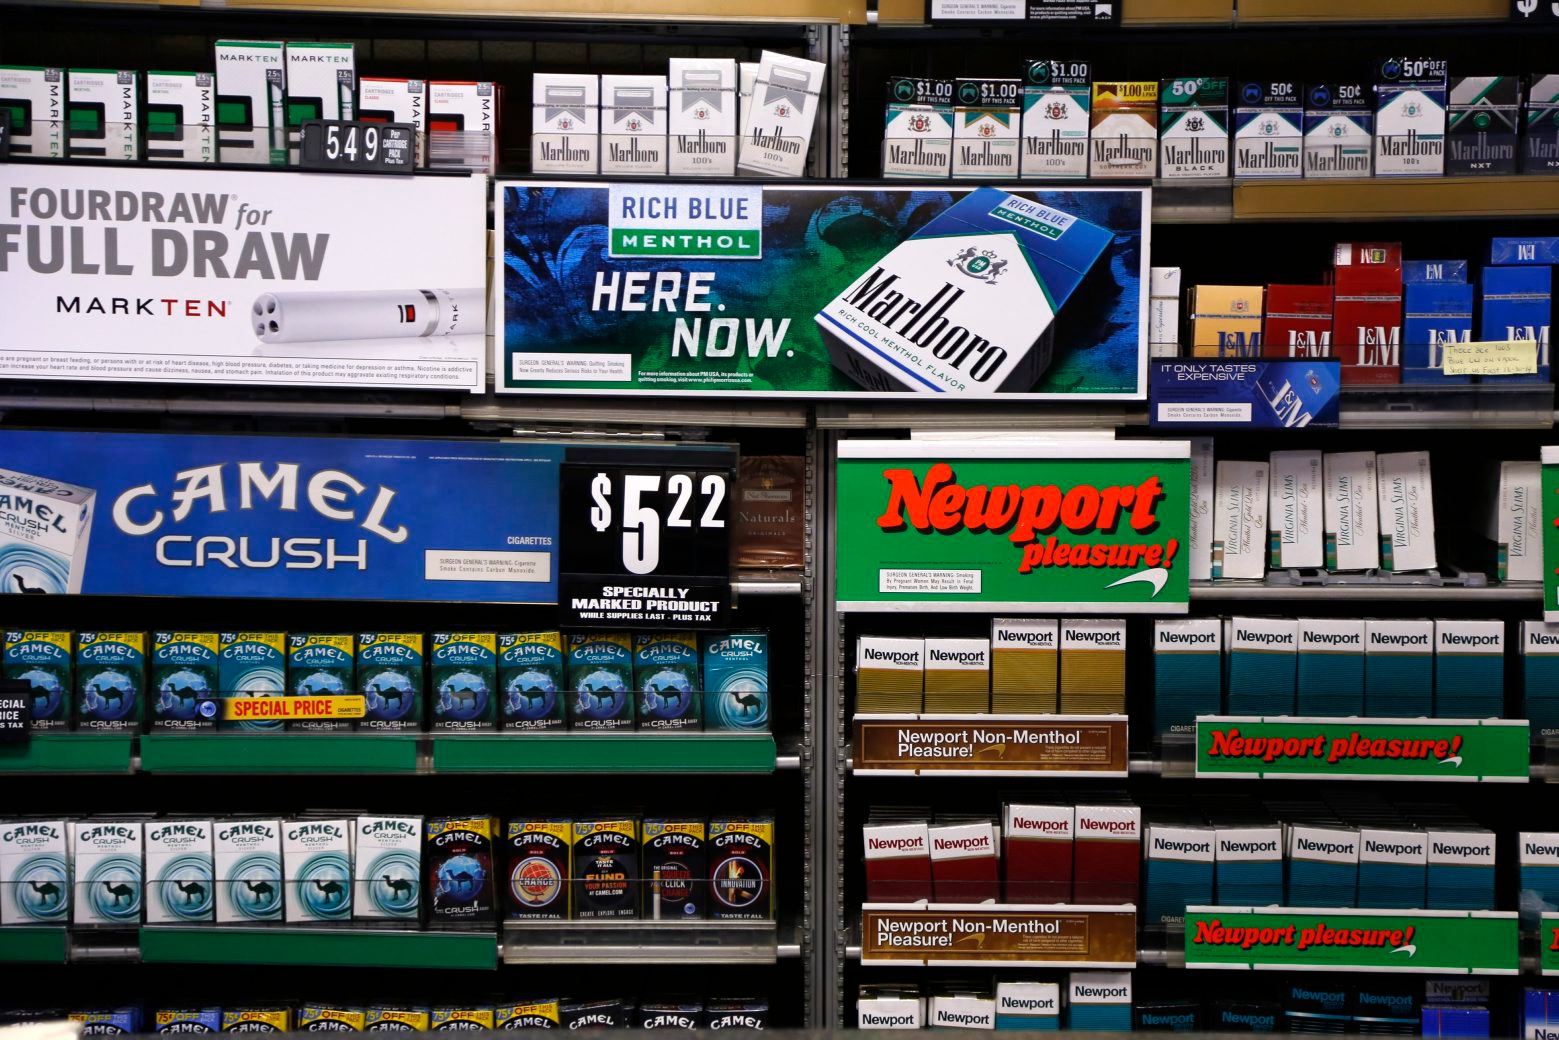 FILE - In this Friday, July 17, 2015 file photo, Camel and Newport cigarettes, both Reynolds American brands, are on display at a Smoker Friendly shop in Pittsburgh. British American Tobacco Plc has agreed to fully take over Reynolds American Inc. on terms that are improved from an initial bid made last year. (AP Photo/Gene J. Puskar, file) Tobacco Merger